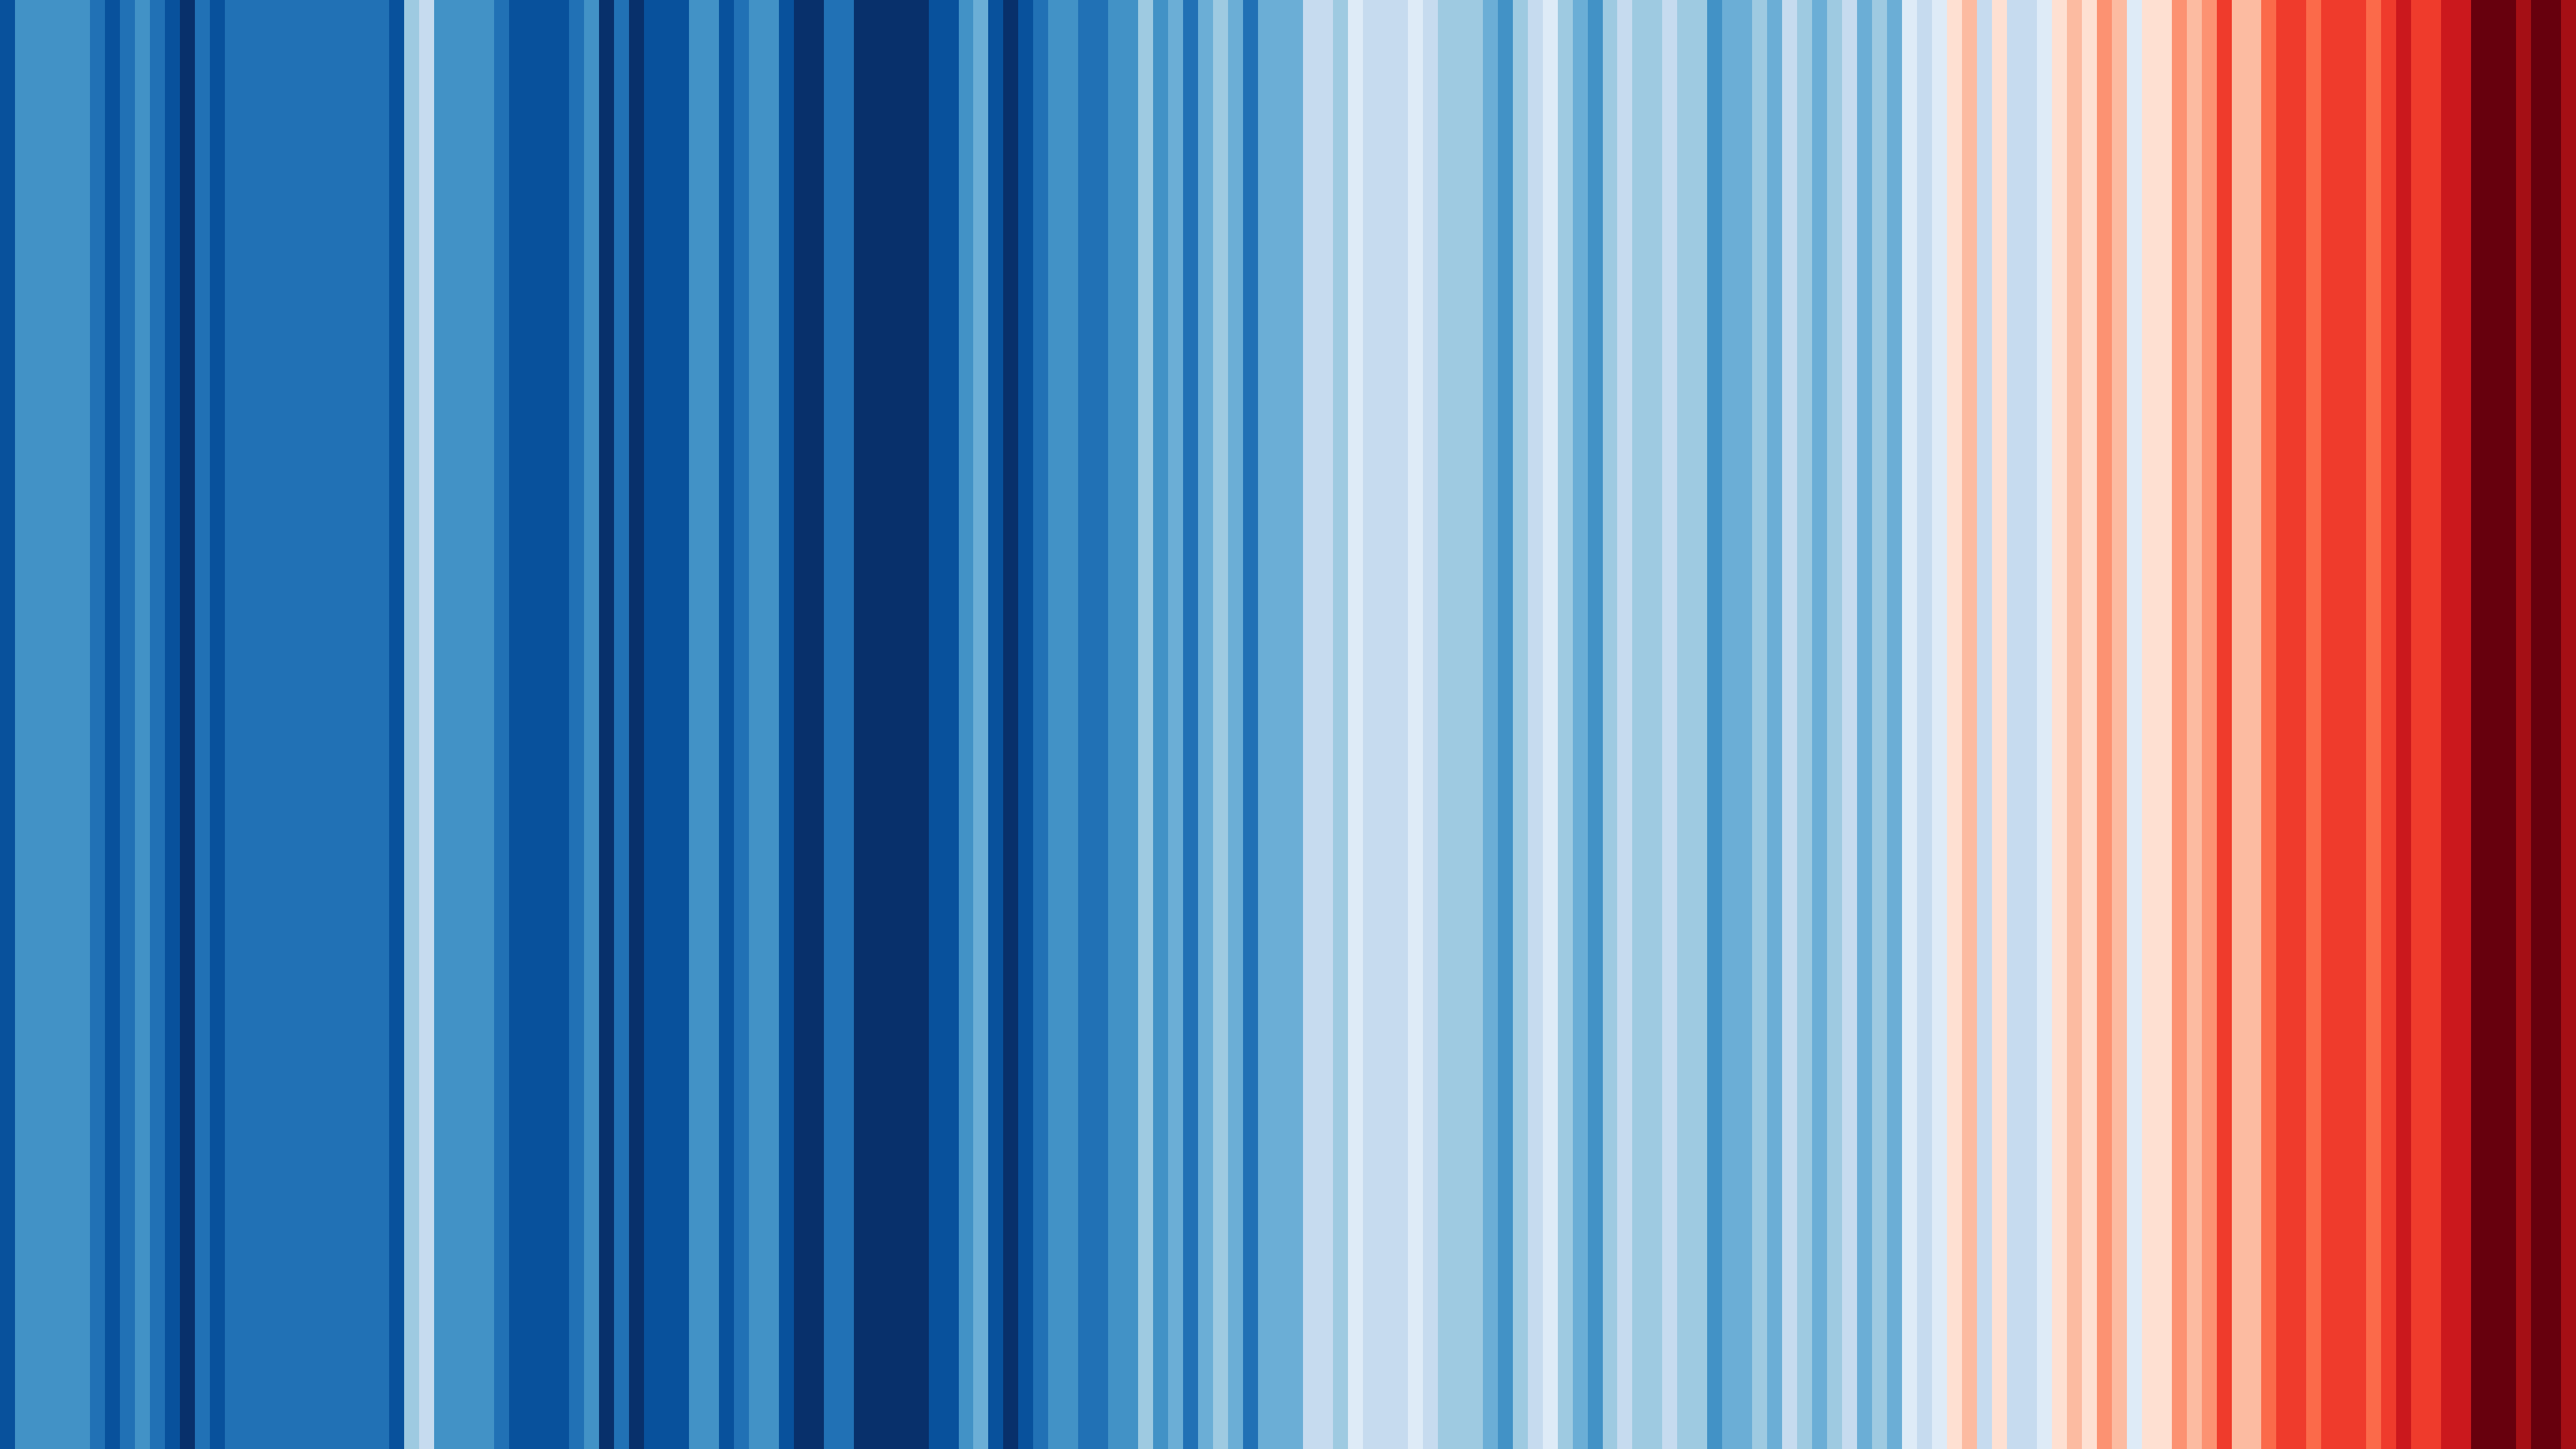 Shown are a series of vertical stripes whose colours range from dark blue to dark red.